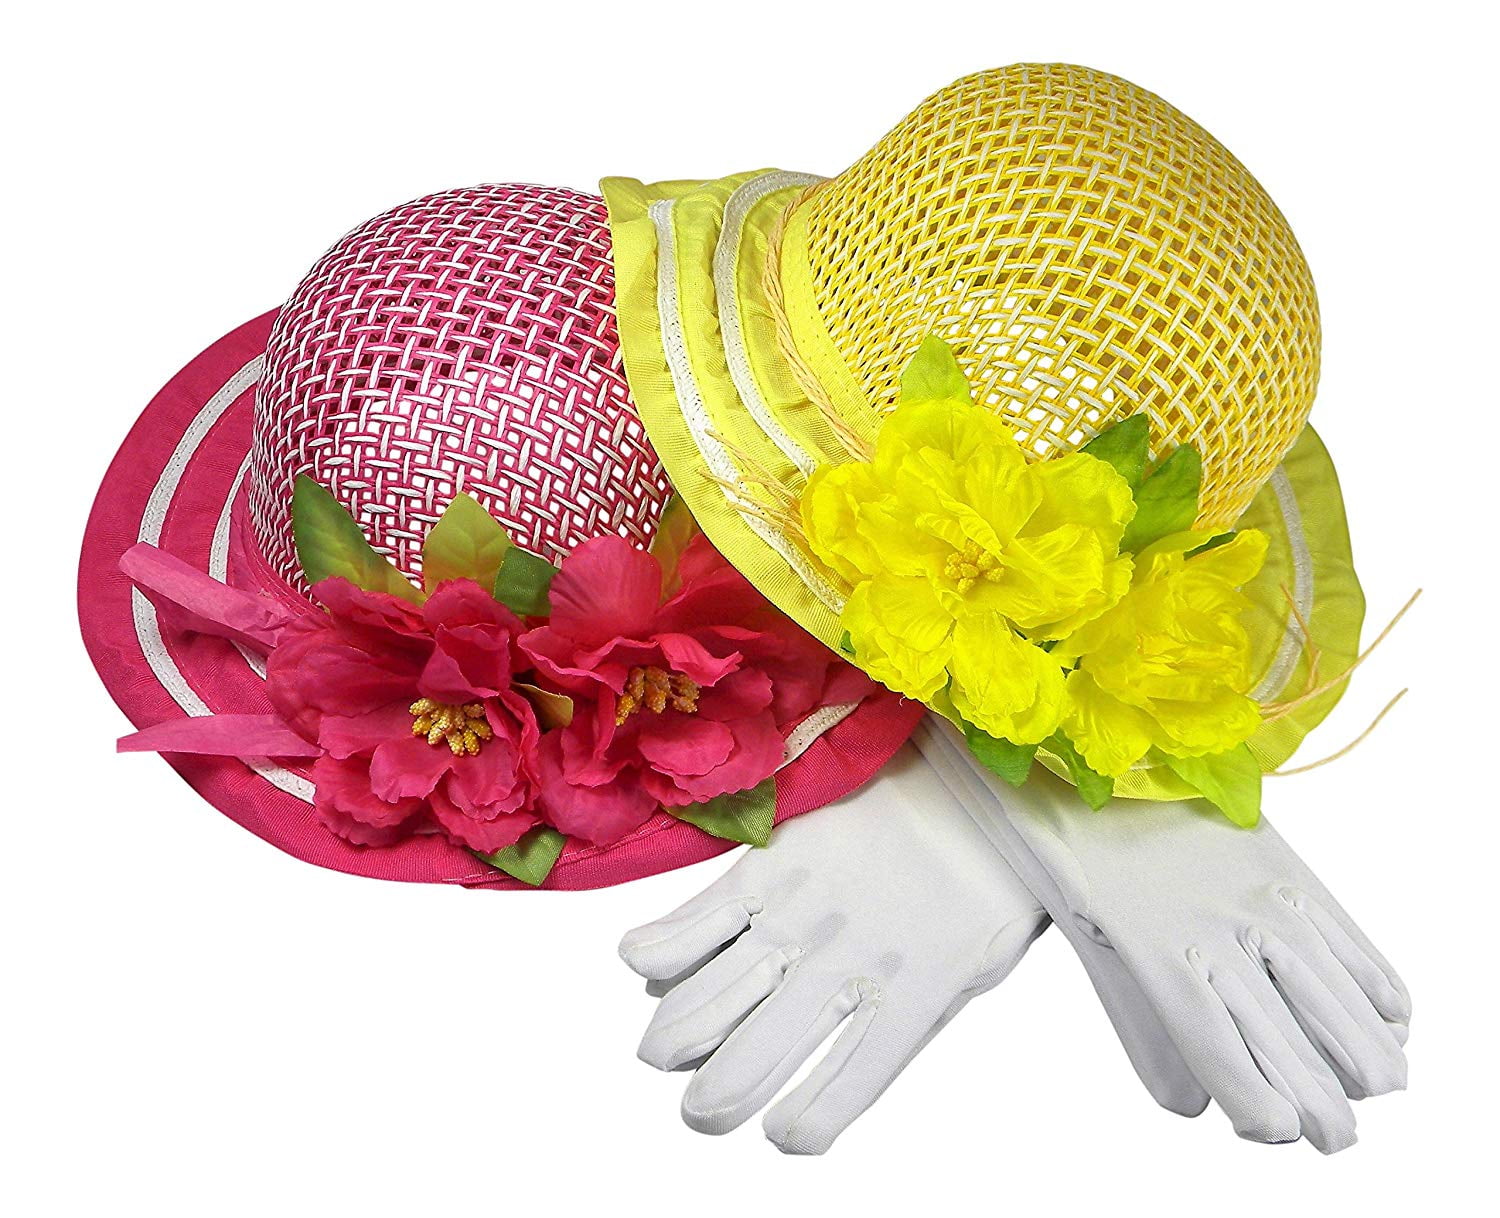 Girls Tea Party Dress Up SET OF 2 Hats Gloves Blue Bright Pink Toys EASTER 